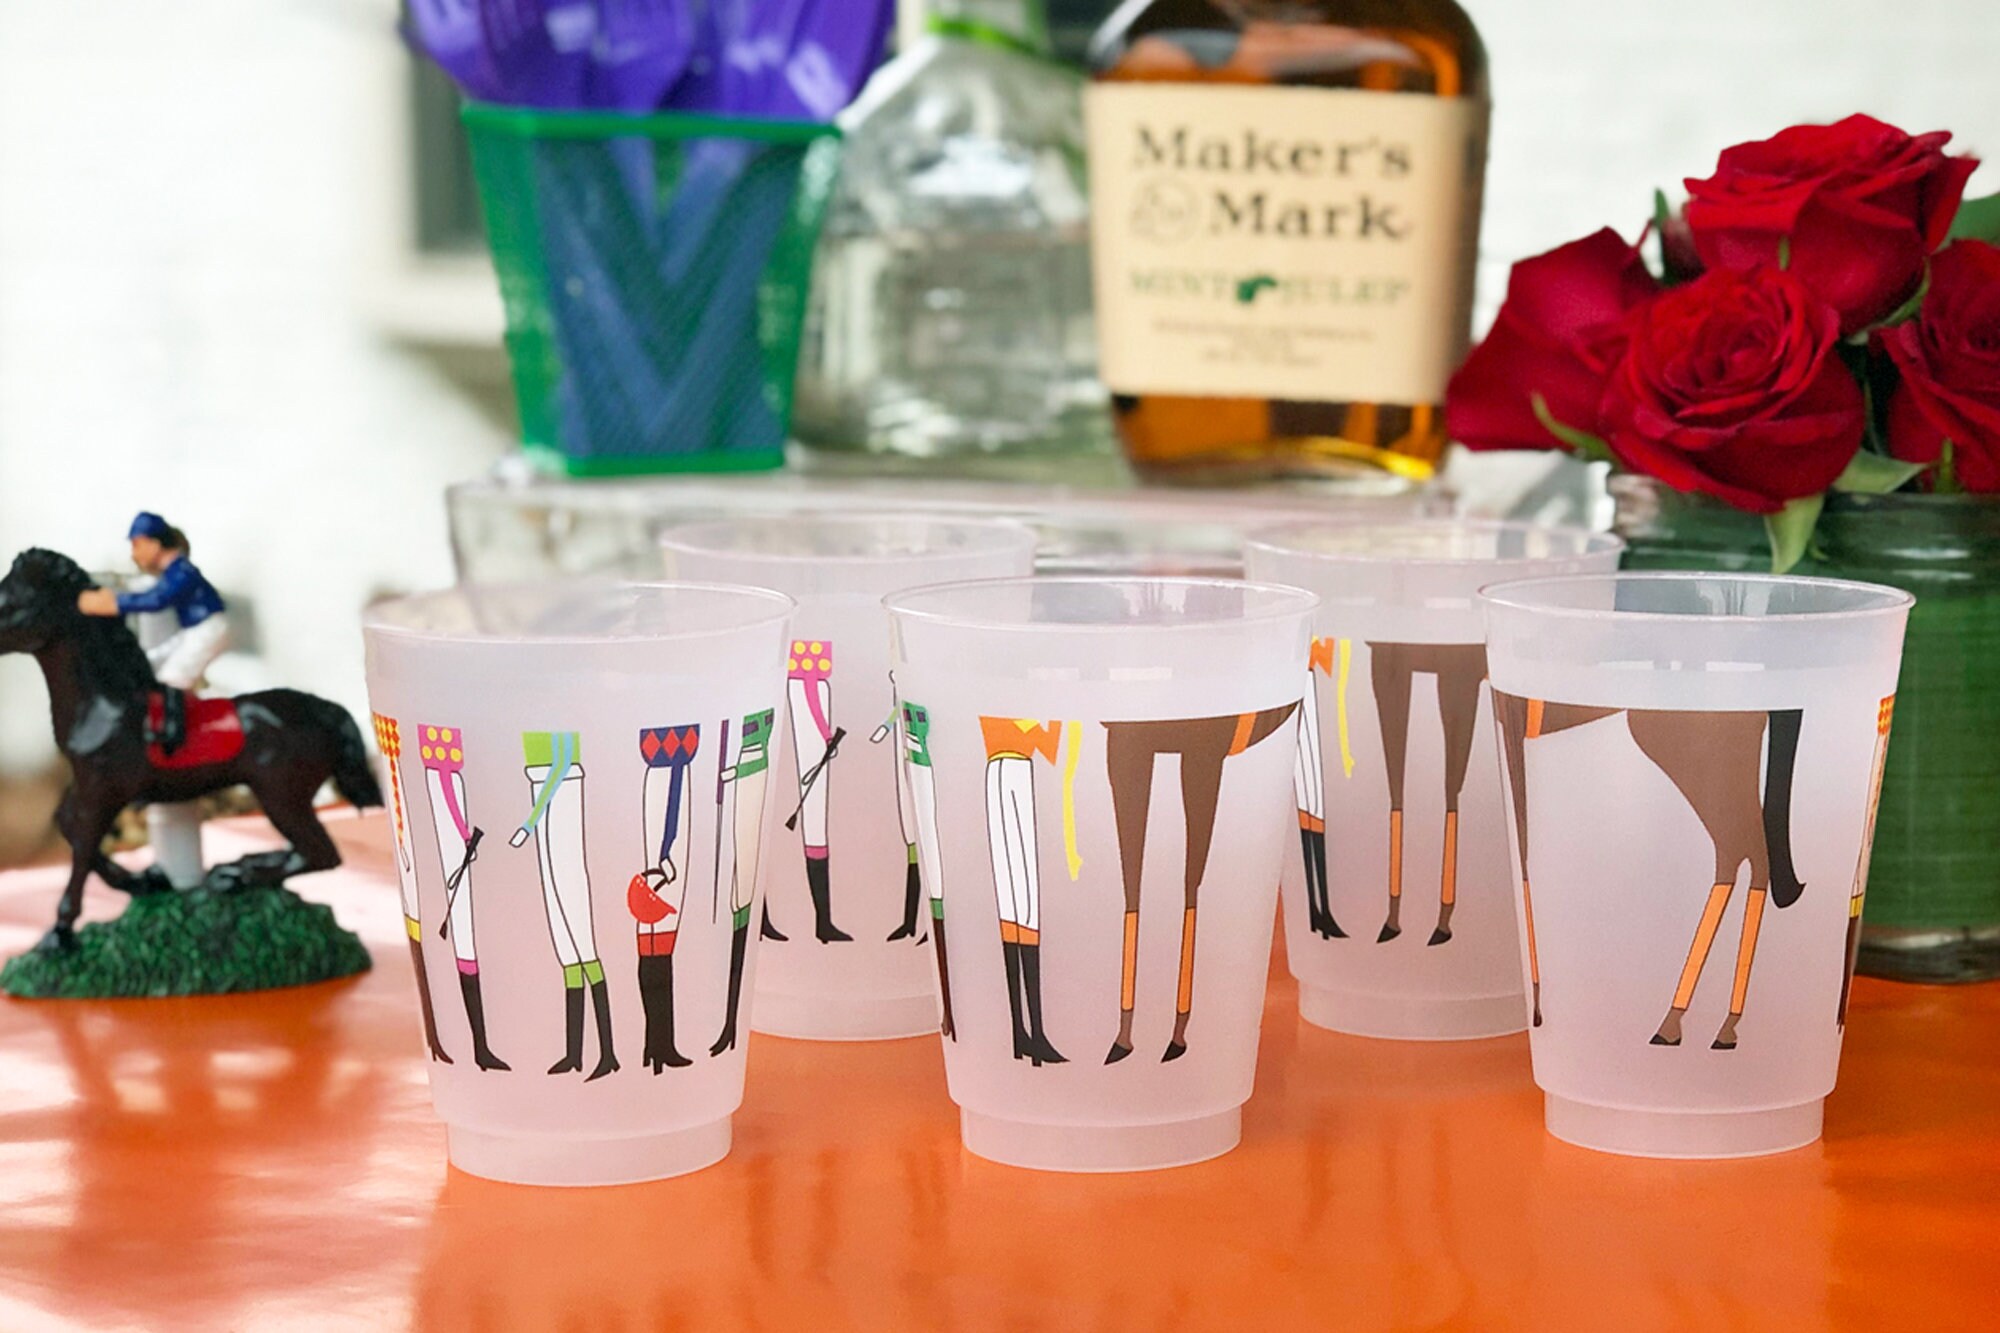 kentucky-derby-party-frosted-roadie-cup-10-pack-etsy